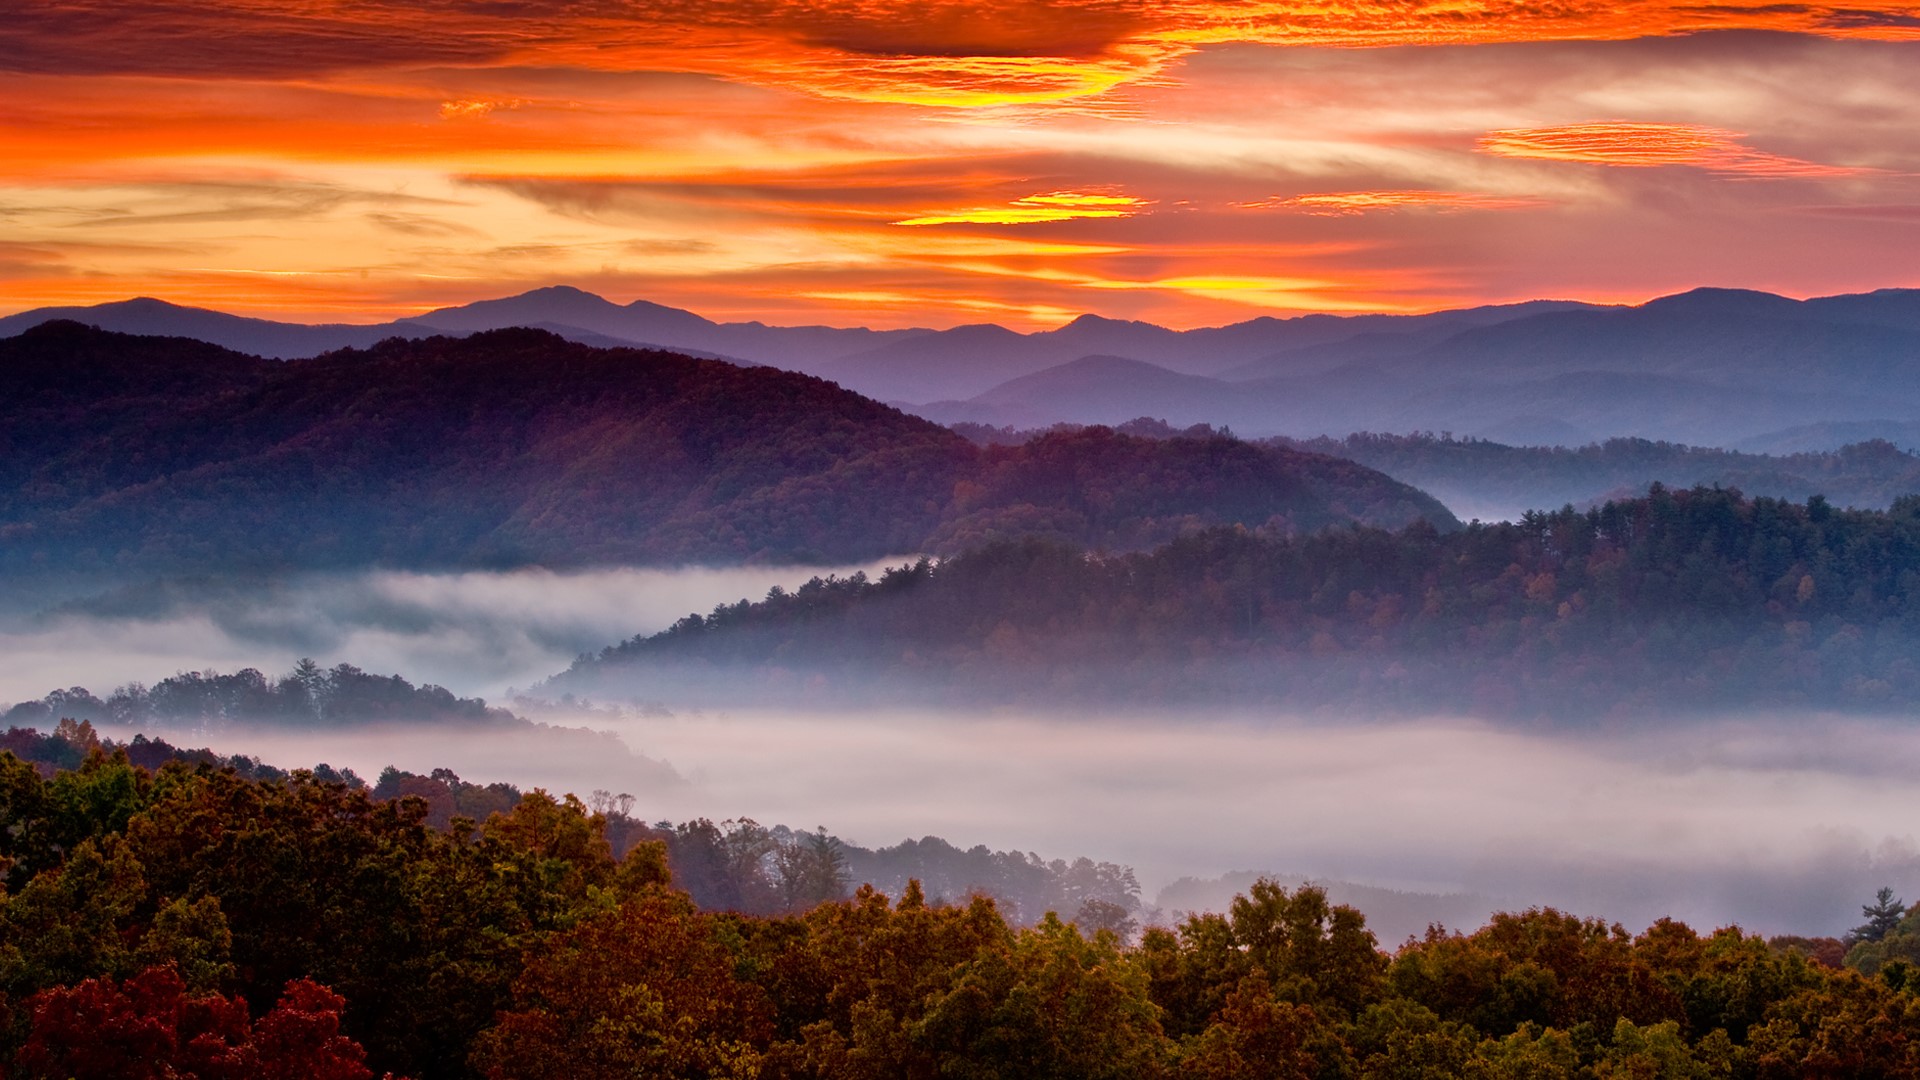  Sunrise  over the Smoky Mountains in autumn from the 